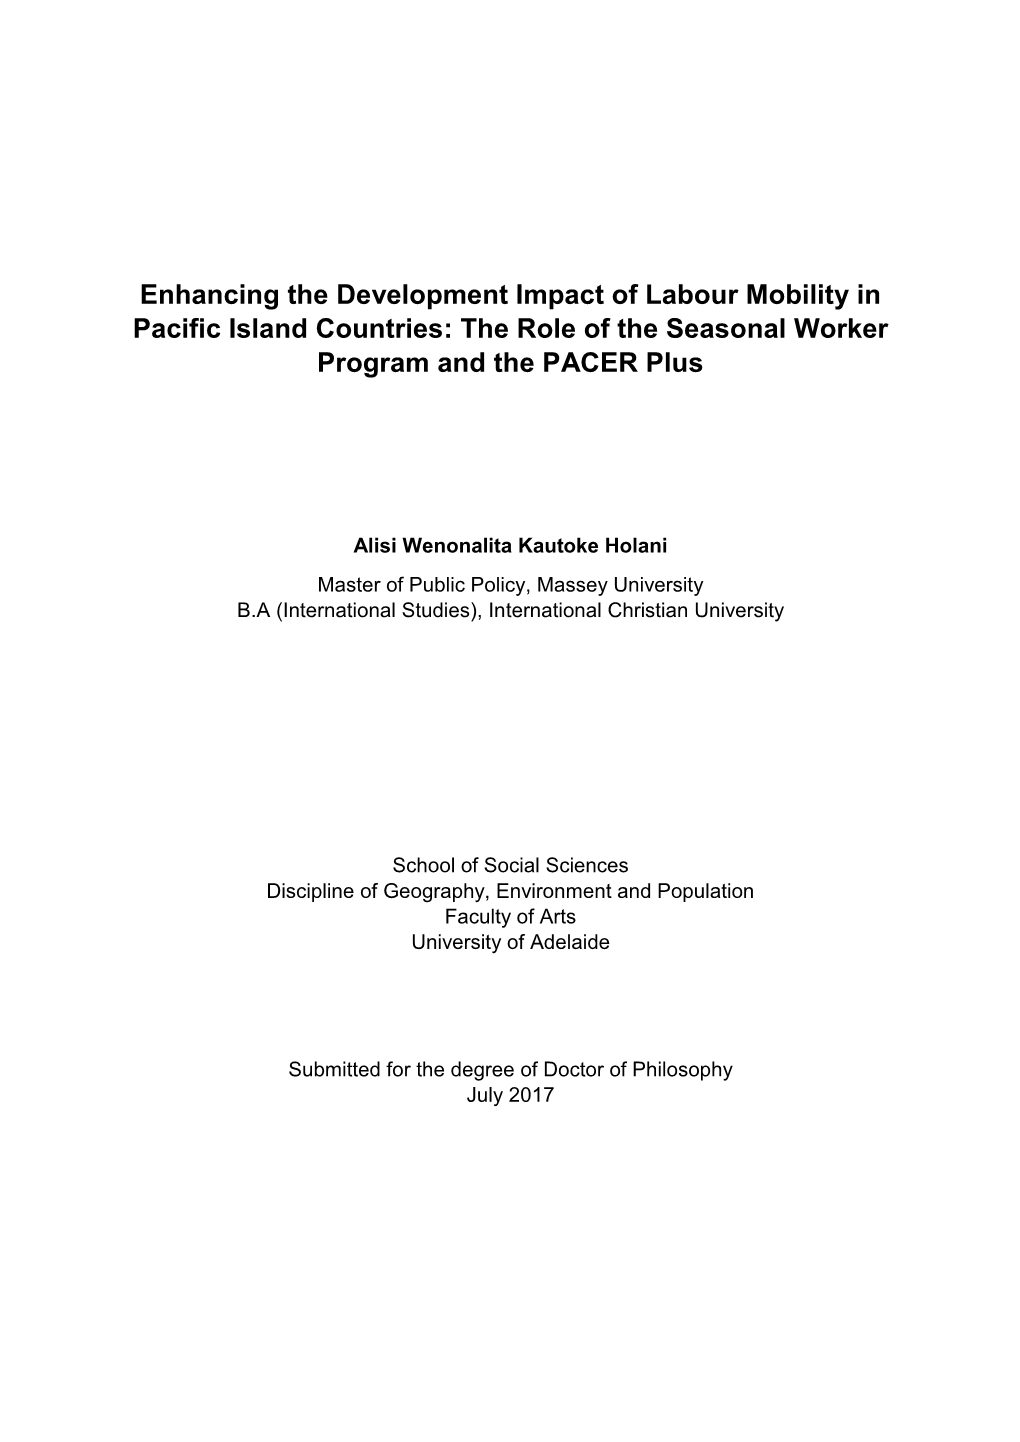 Enhancing the Development Impact of Labour Mobility in Pacific Island Countries: the Role of the Seasonal Worker Program and the PACER Plus